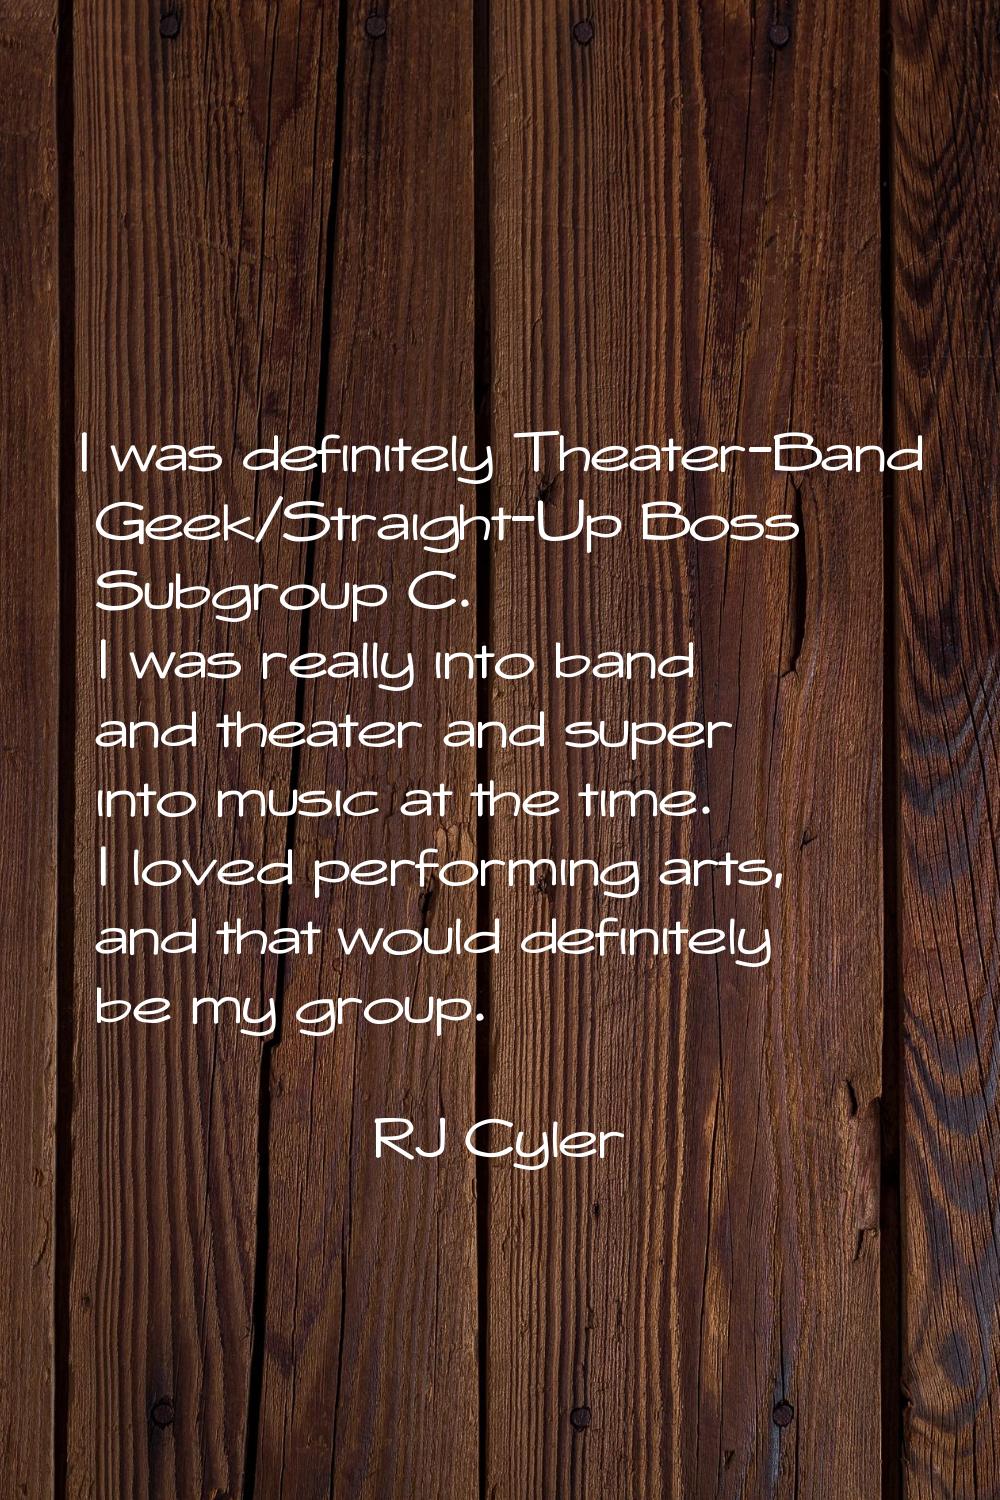 I was definitely Theater-Band Geek/Straight-Up Boss Subgroup C. I was really into band and theater 